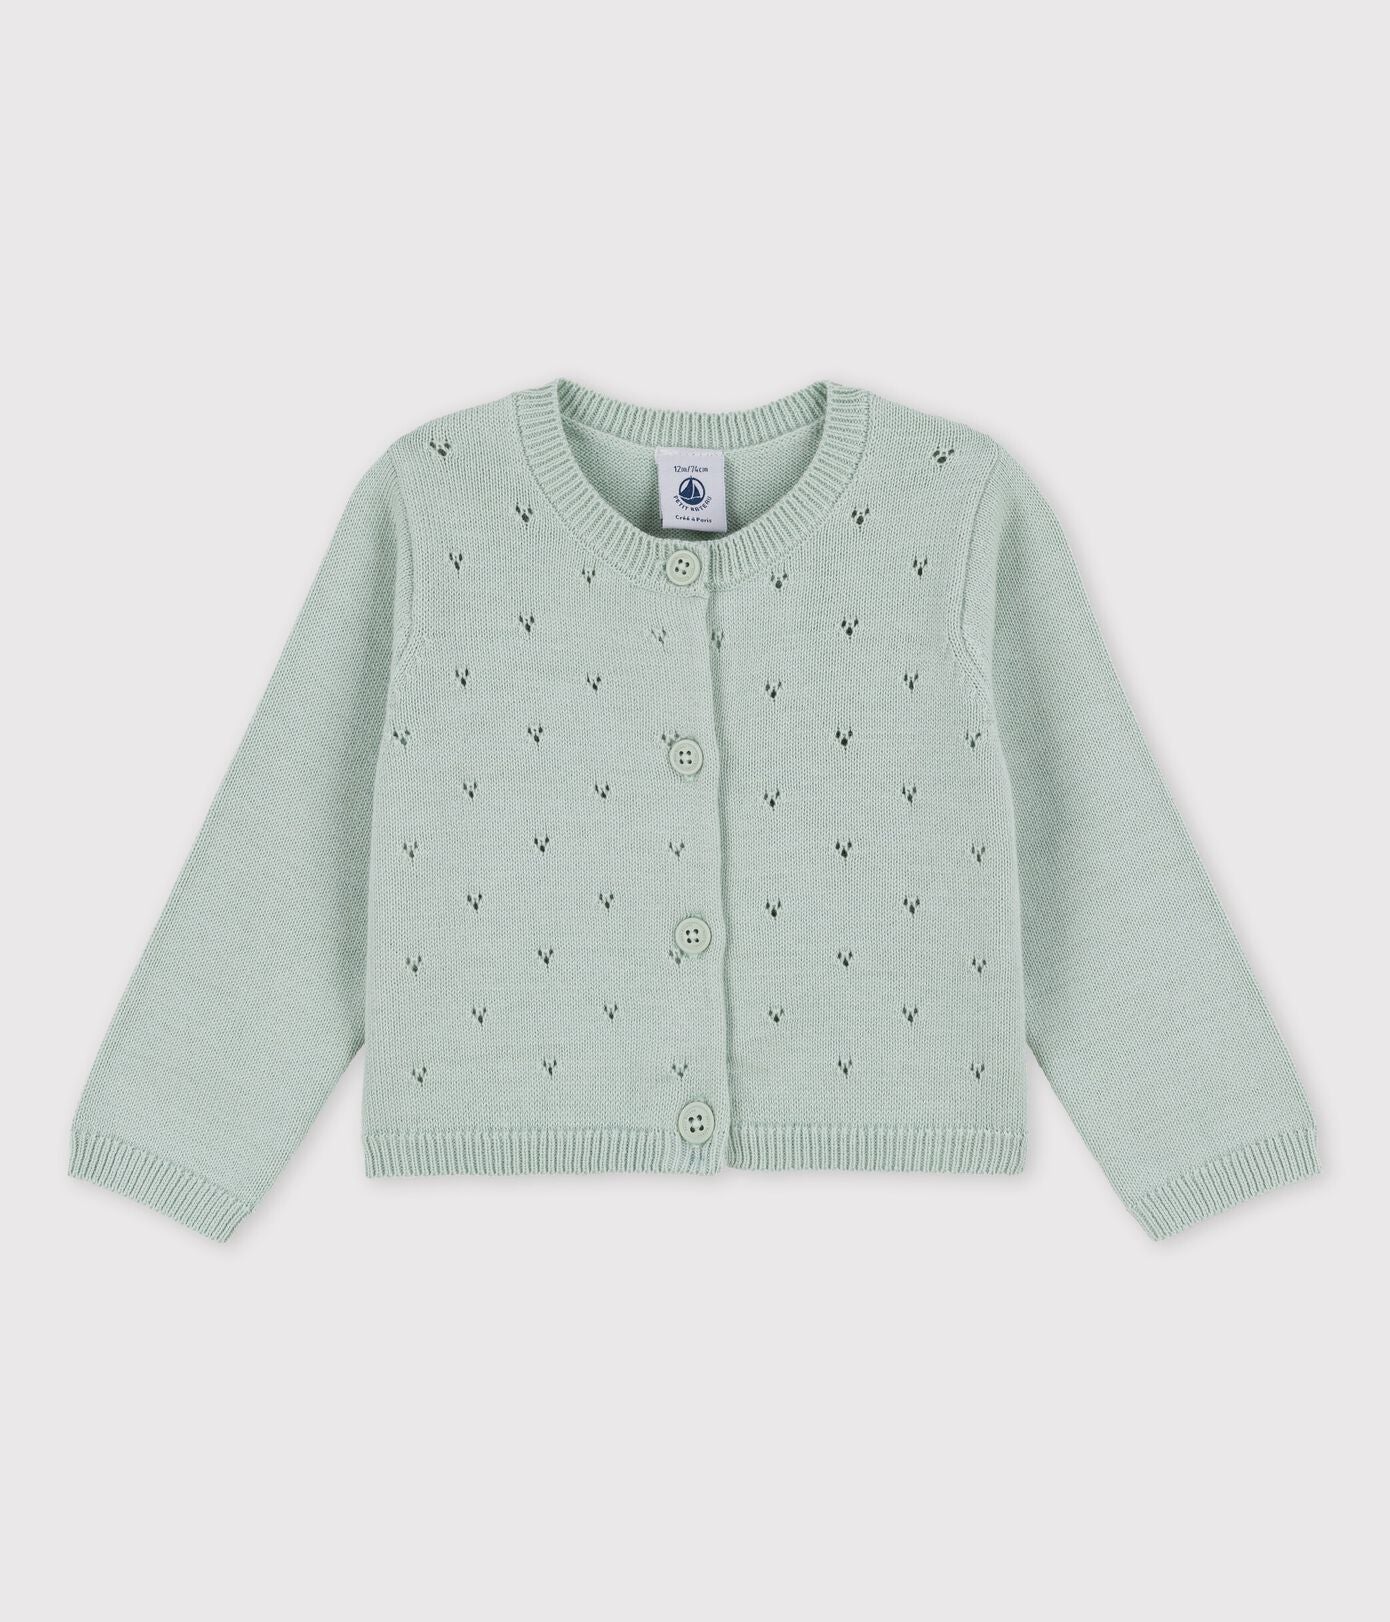 BABIES' SOPHISTICATED KNITTED CARDIGAN